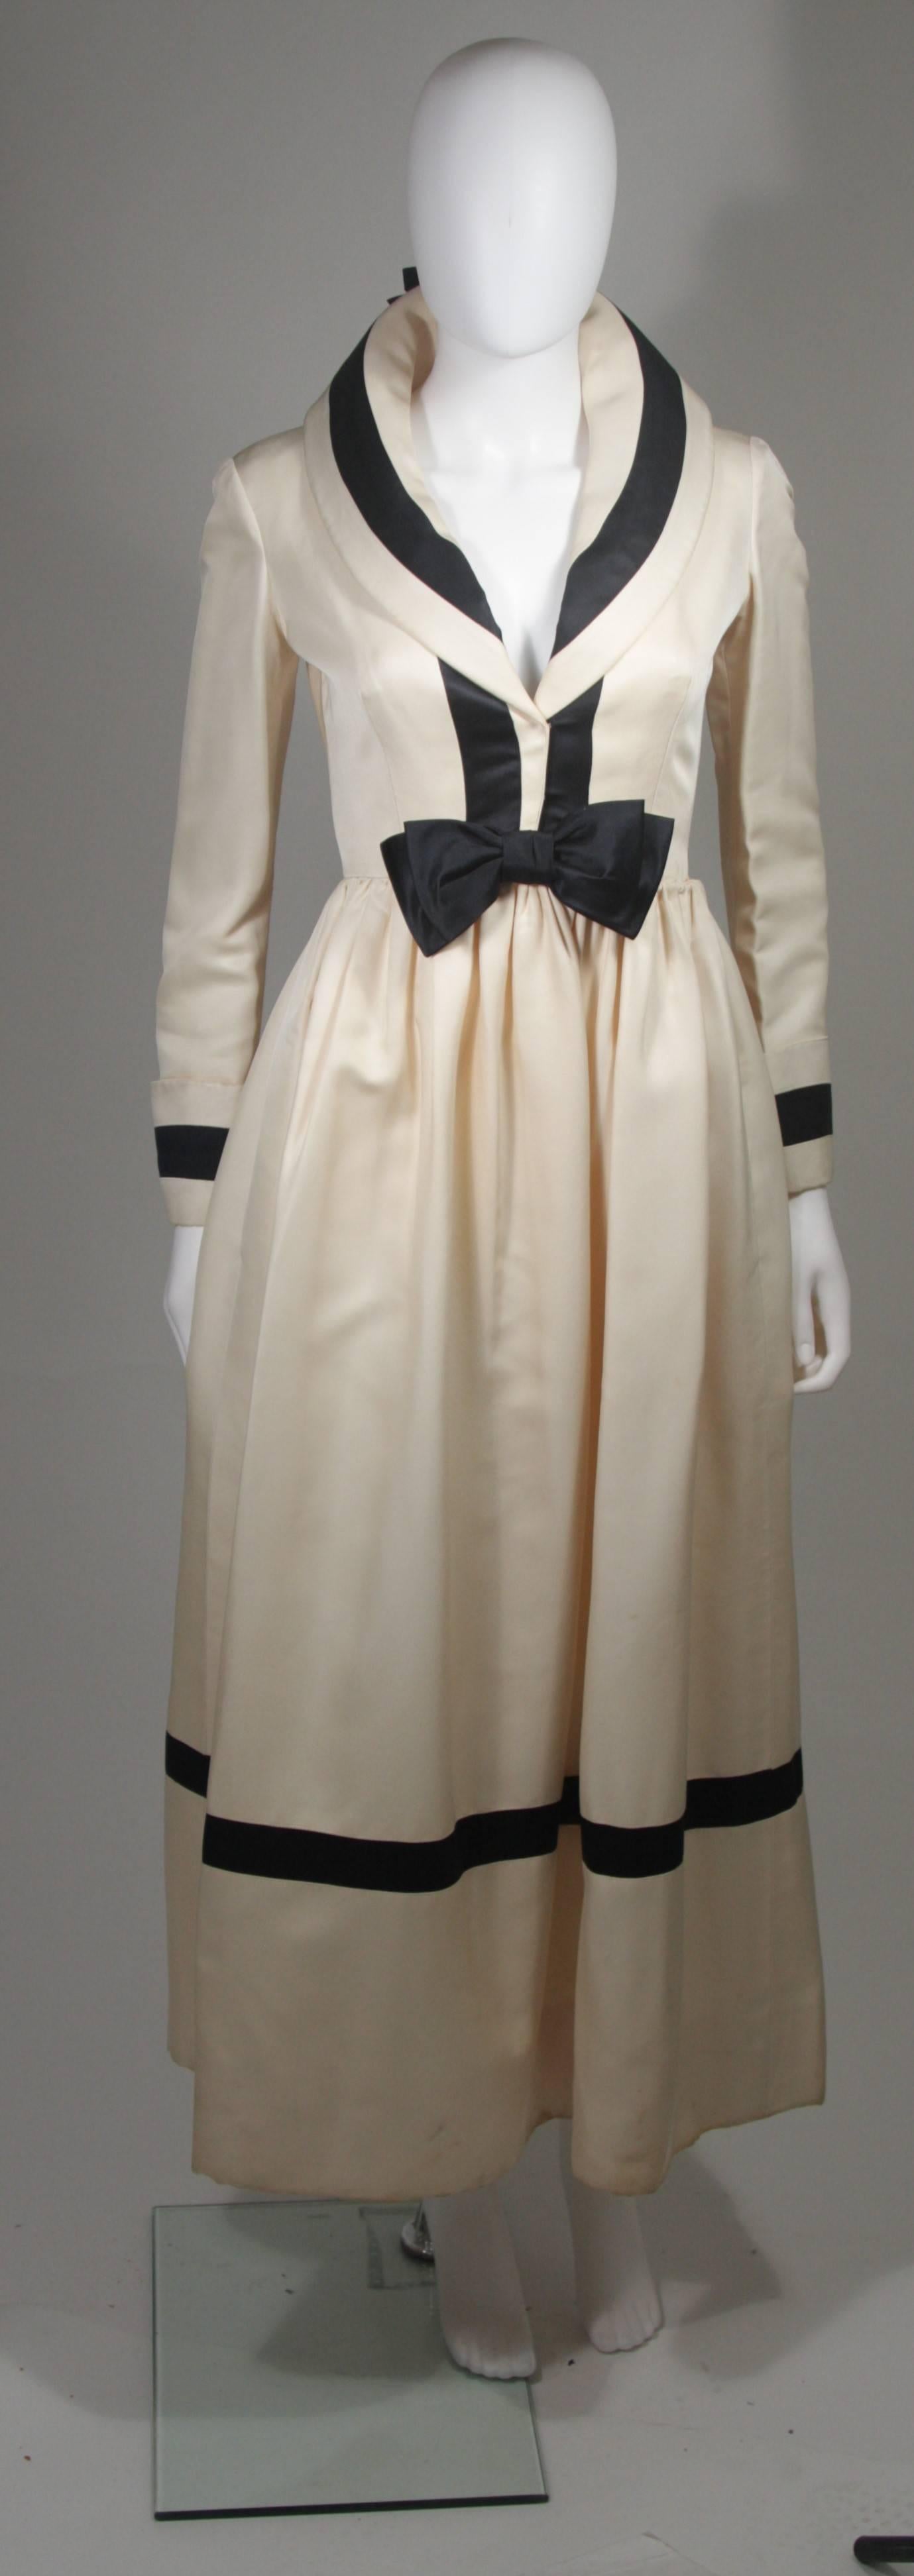 This Geoffrey Beene dress is composed of a cream silk and features black satin trim. There are center front closures, side pockets, and an attached belt detail. Sold in 